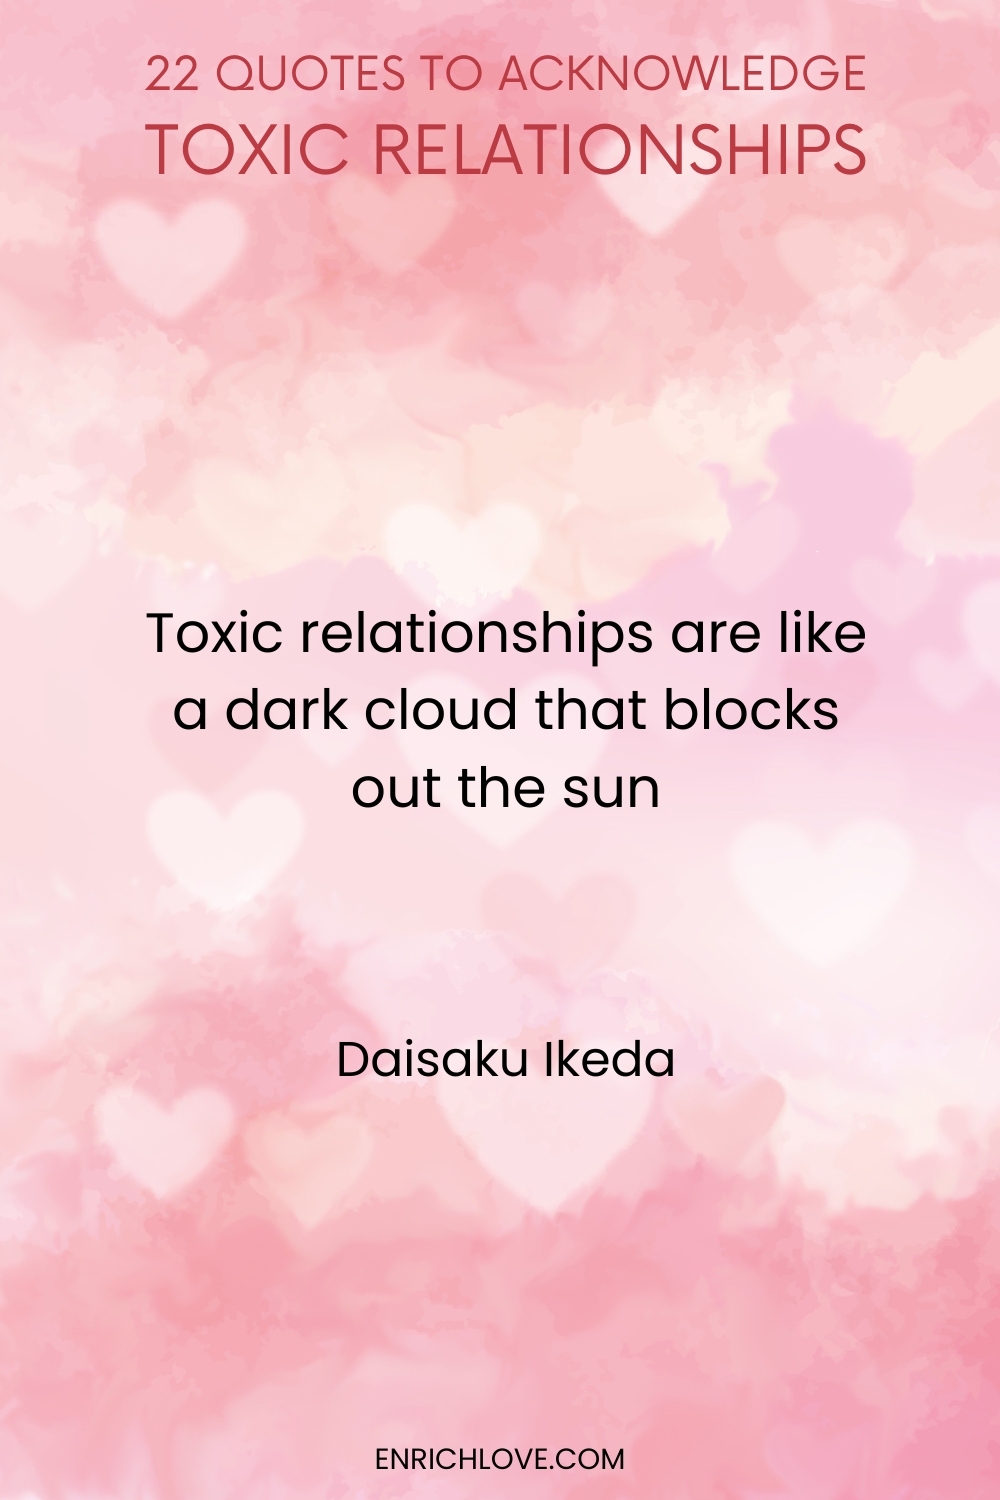 22 Quotes to Acknowledge Toxic Relationships -Toxic relationships are like a dark cloud that blocks out the sun by Daisaku Ikeda